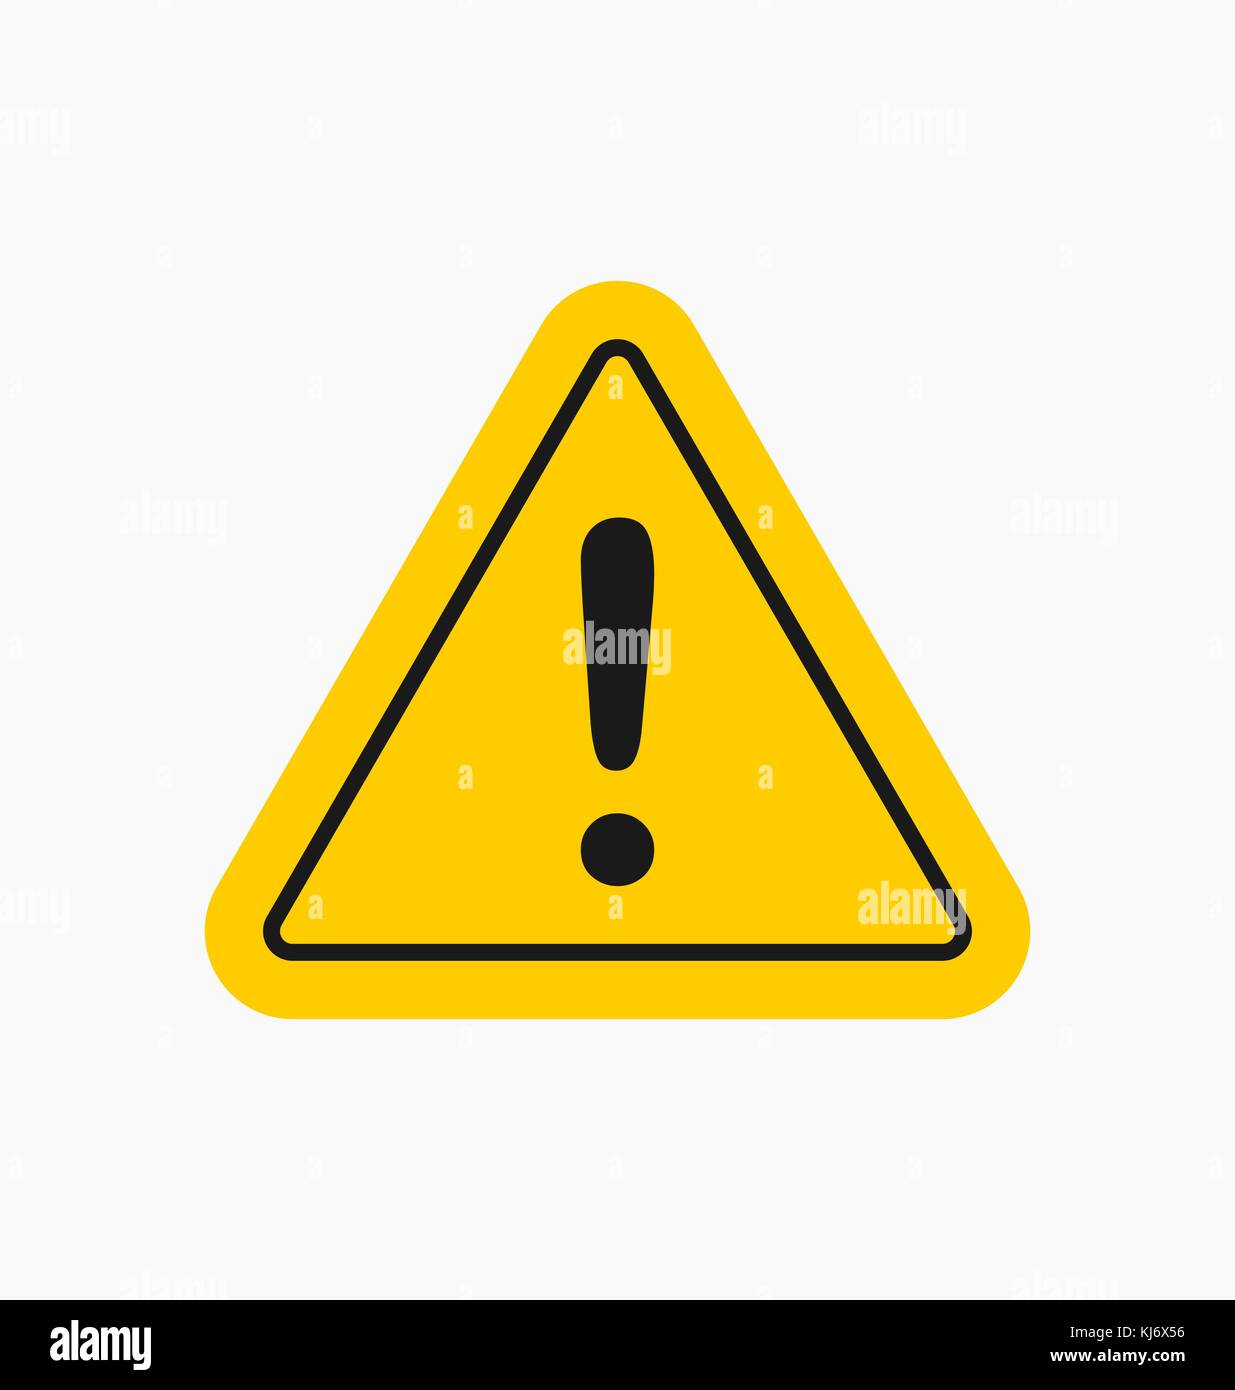 Caution icon / sign in flat style isolated. Warning symbol for your ...